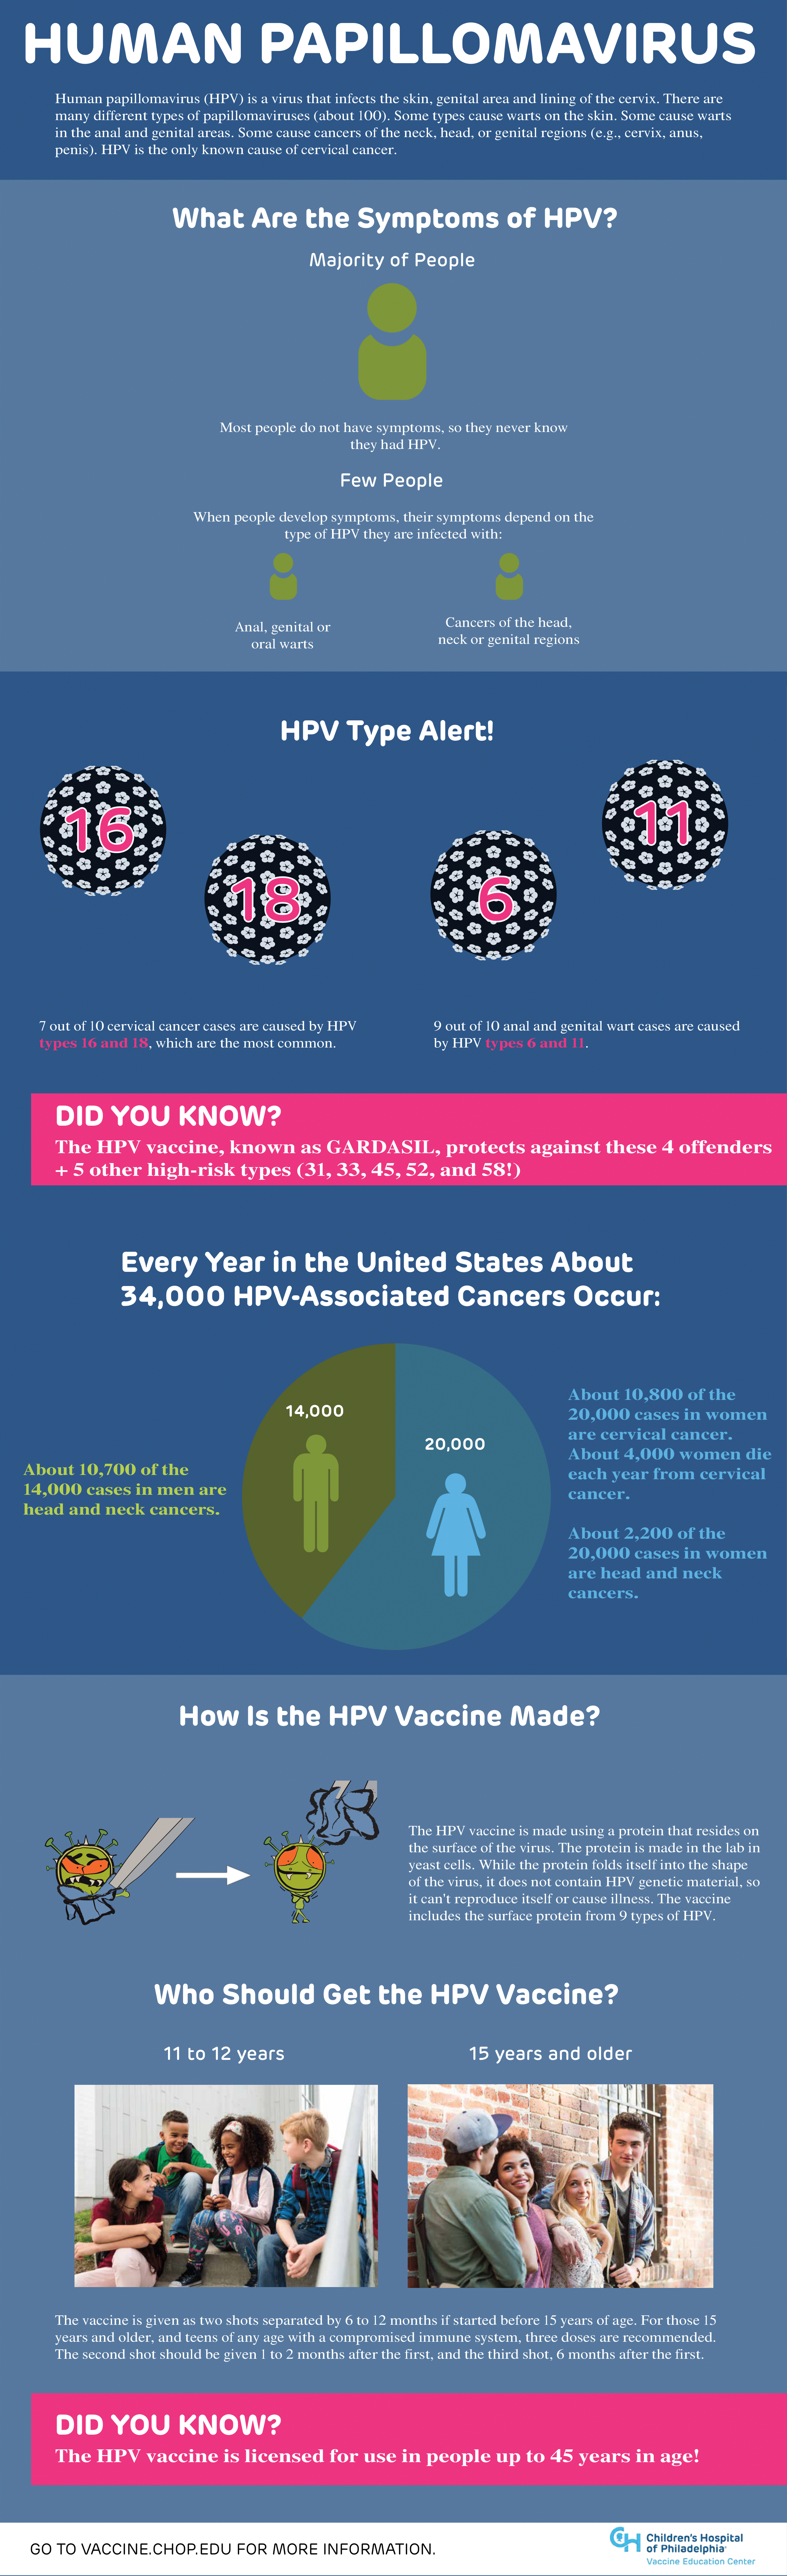 CHOP HPV Infographic